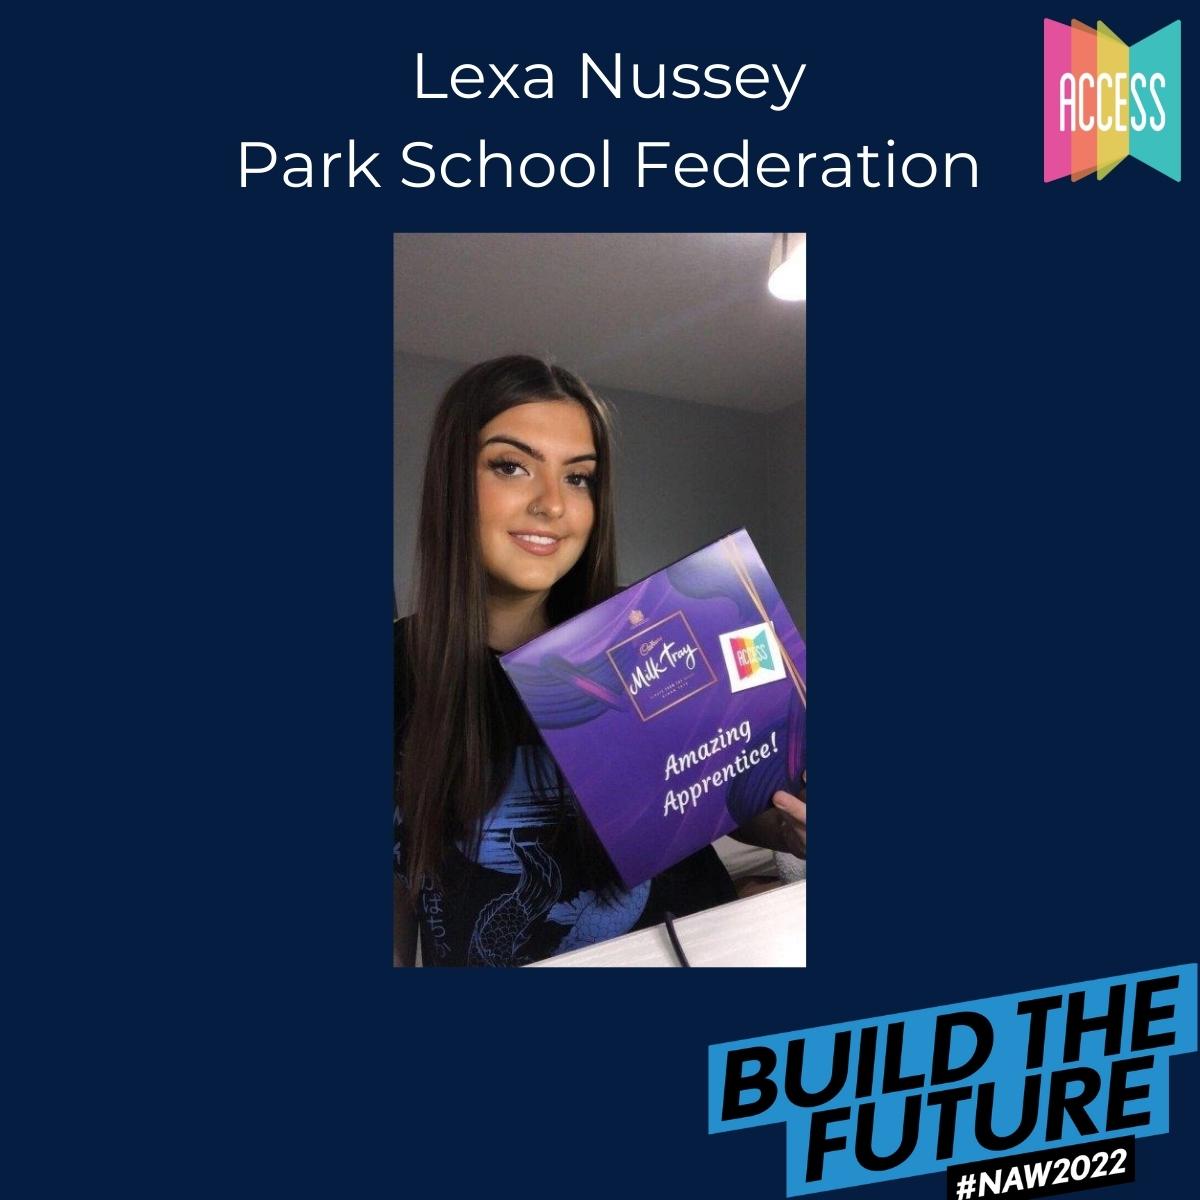 Lexa is a Level 3 Apprentice at Park Fed. She is almost at the end of her apprenticeship, and she has been a pleasure to support.  Well done Lexa, you are an Amazing Apprentice! #NAW2022 #BuildTheFuture @Apprenticeships #AskAnApprentice